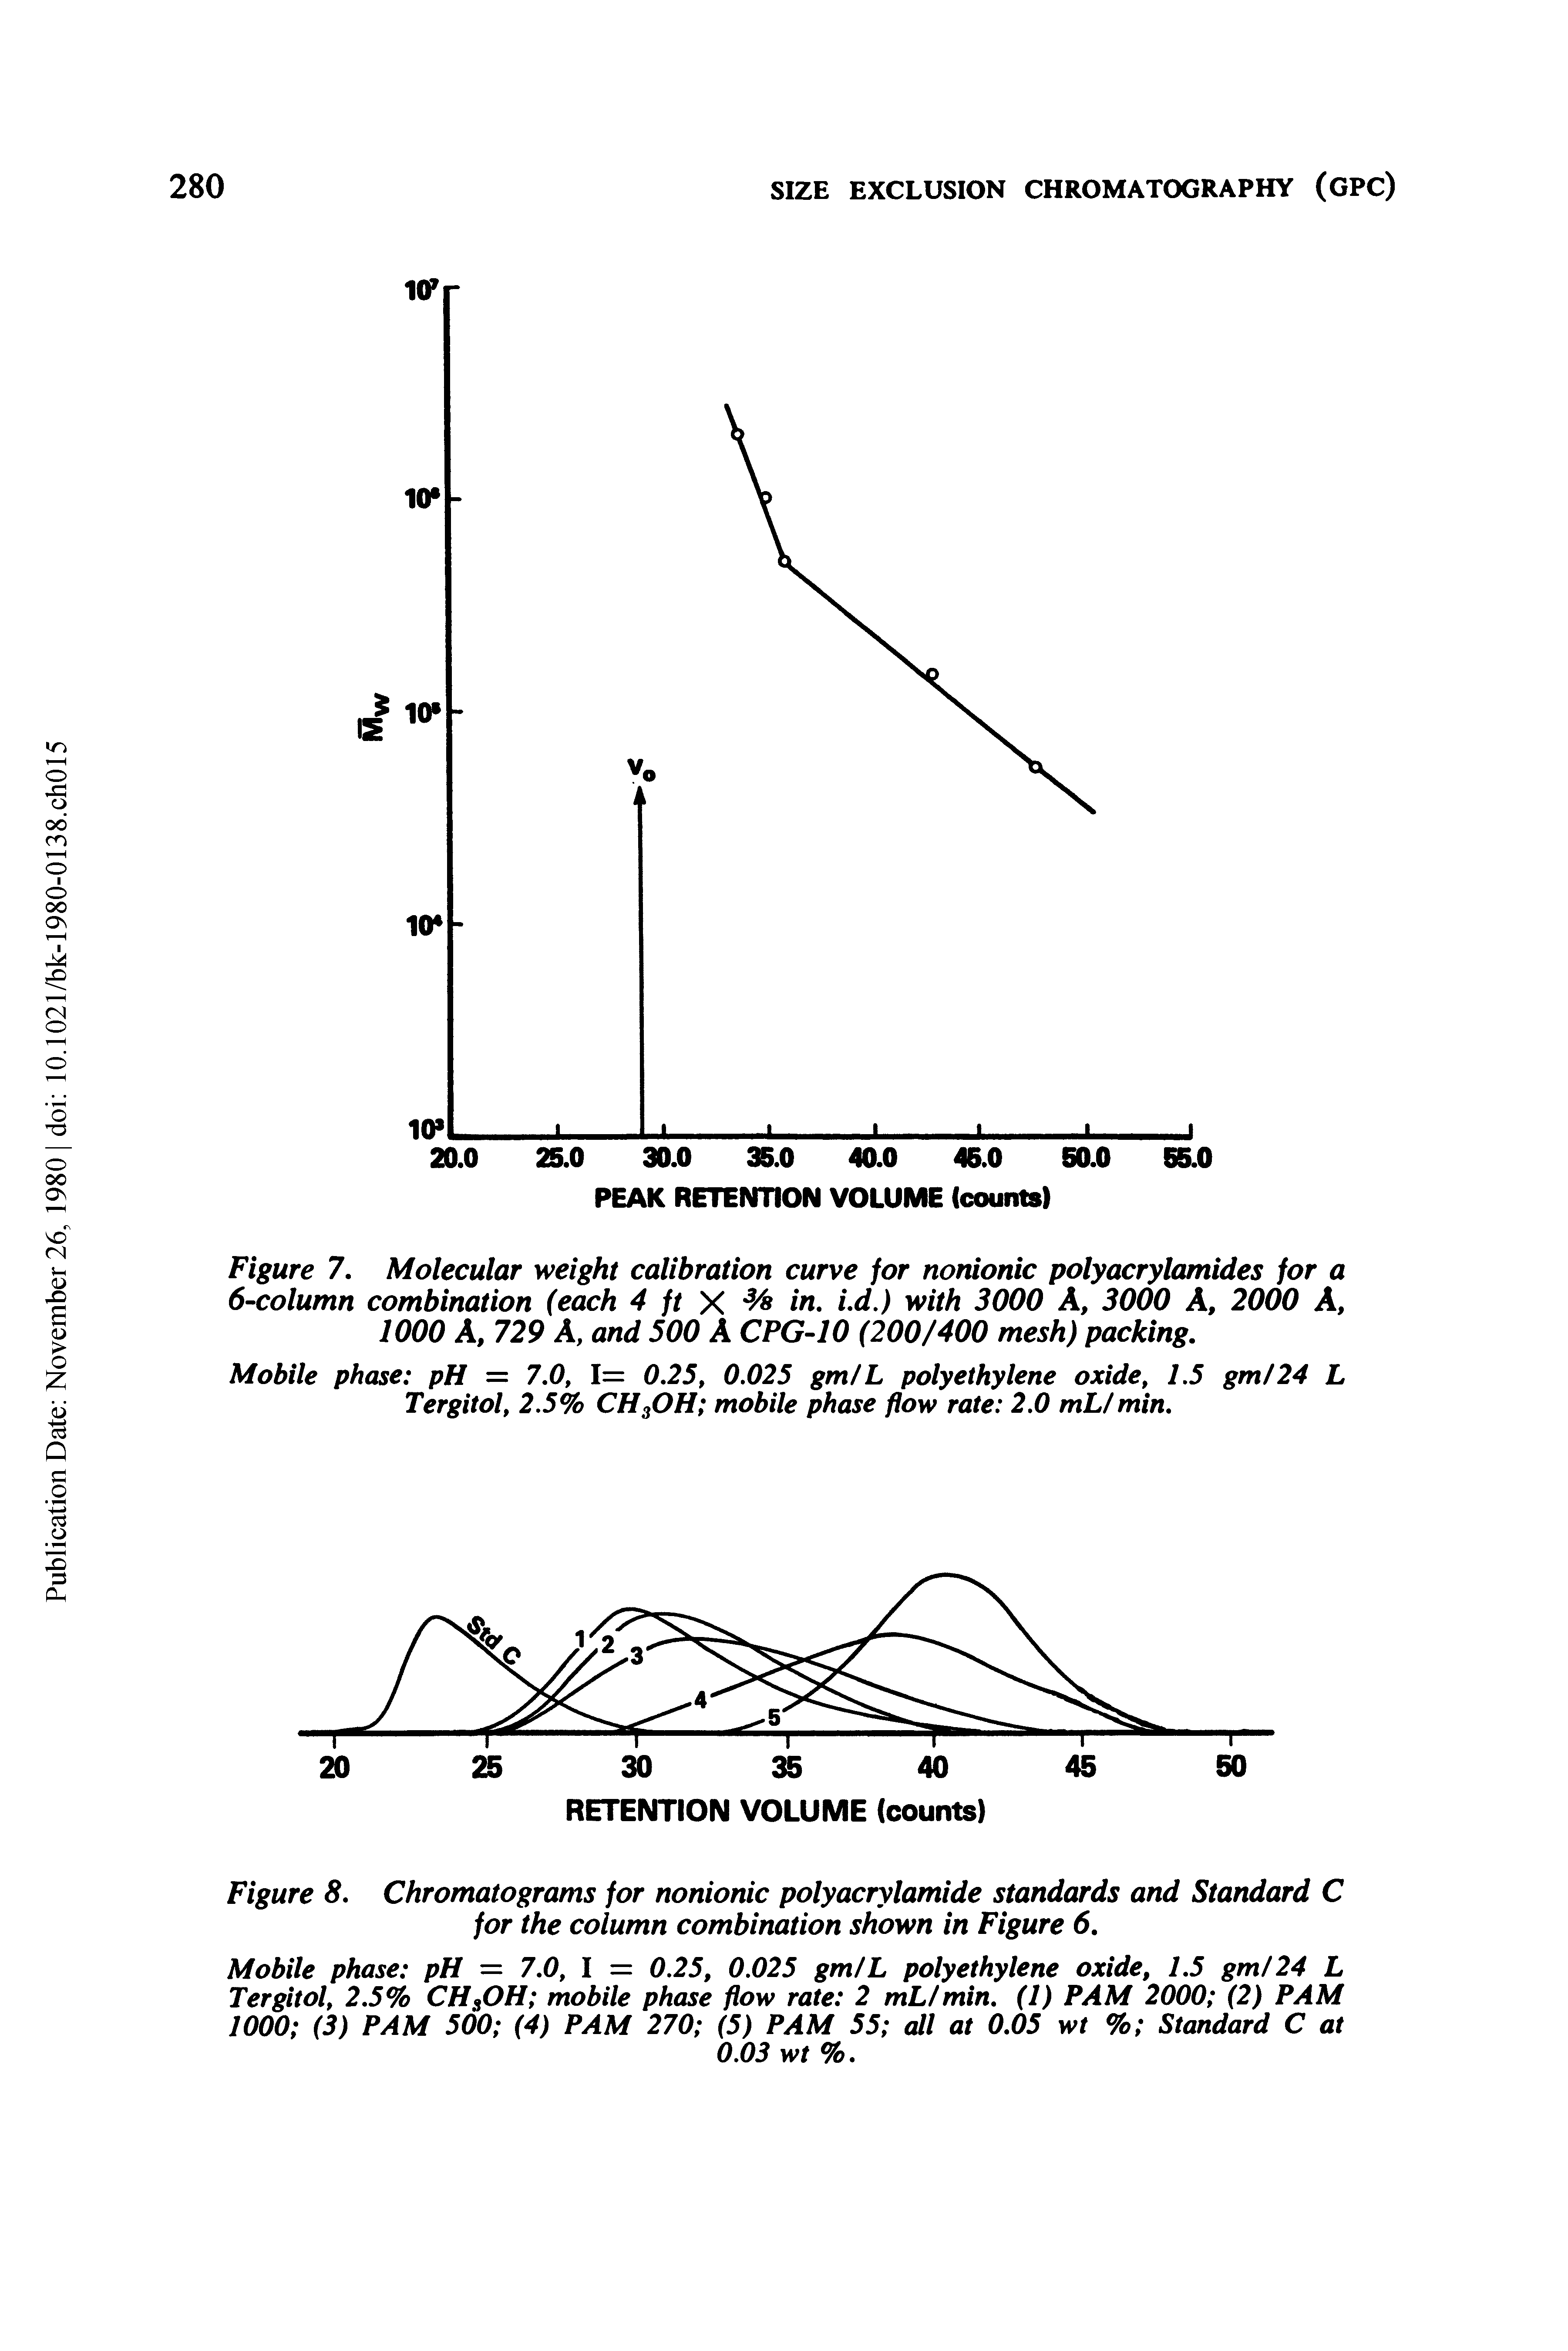 Figure 7. Molecular weight calibration curve for nonionic polyacrylamides for a 6-column combination (each 4 ft X in, Ld.) with 3000 A, 3000 A, 2000 A, 1000 A, 729 A, and 500 A CPG-10 (200/400 mesh) packing.